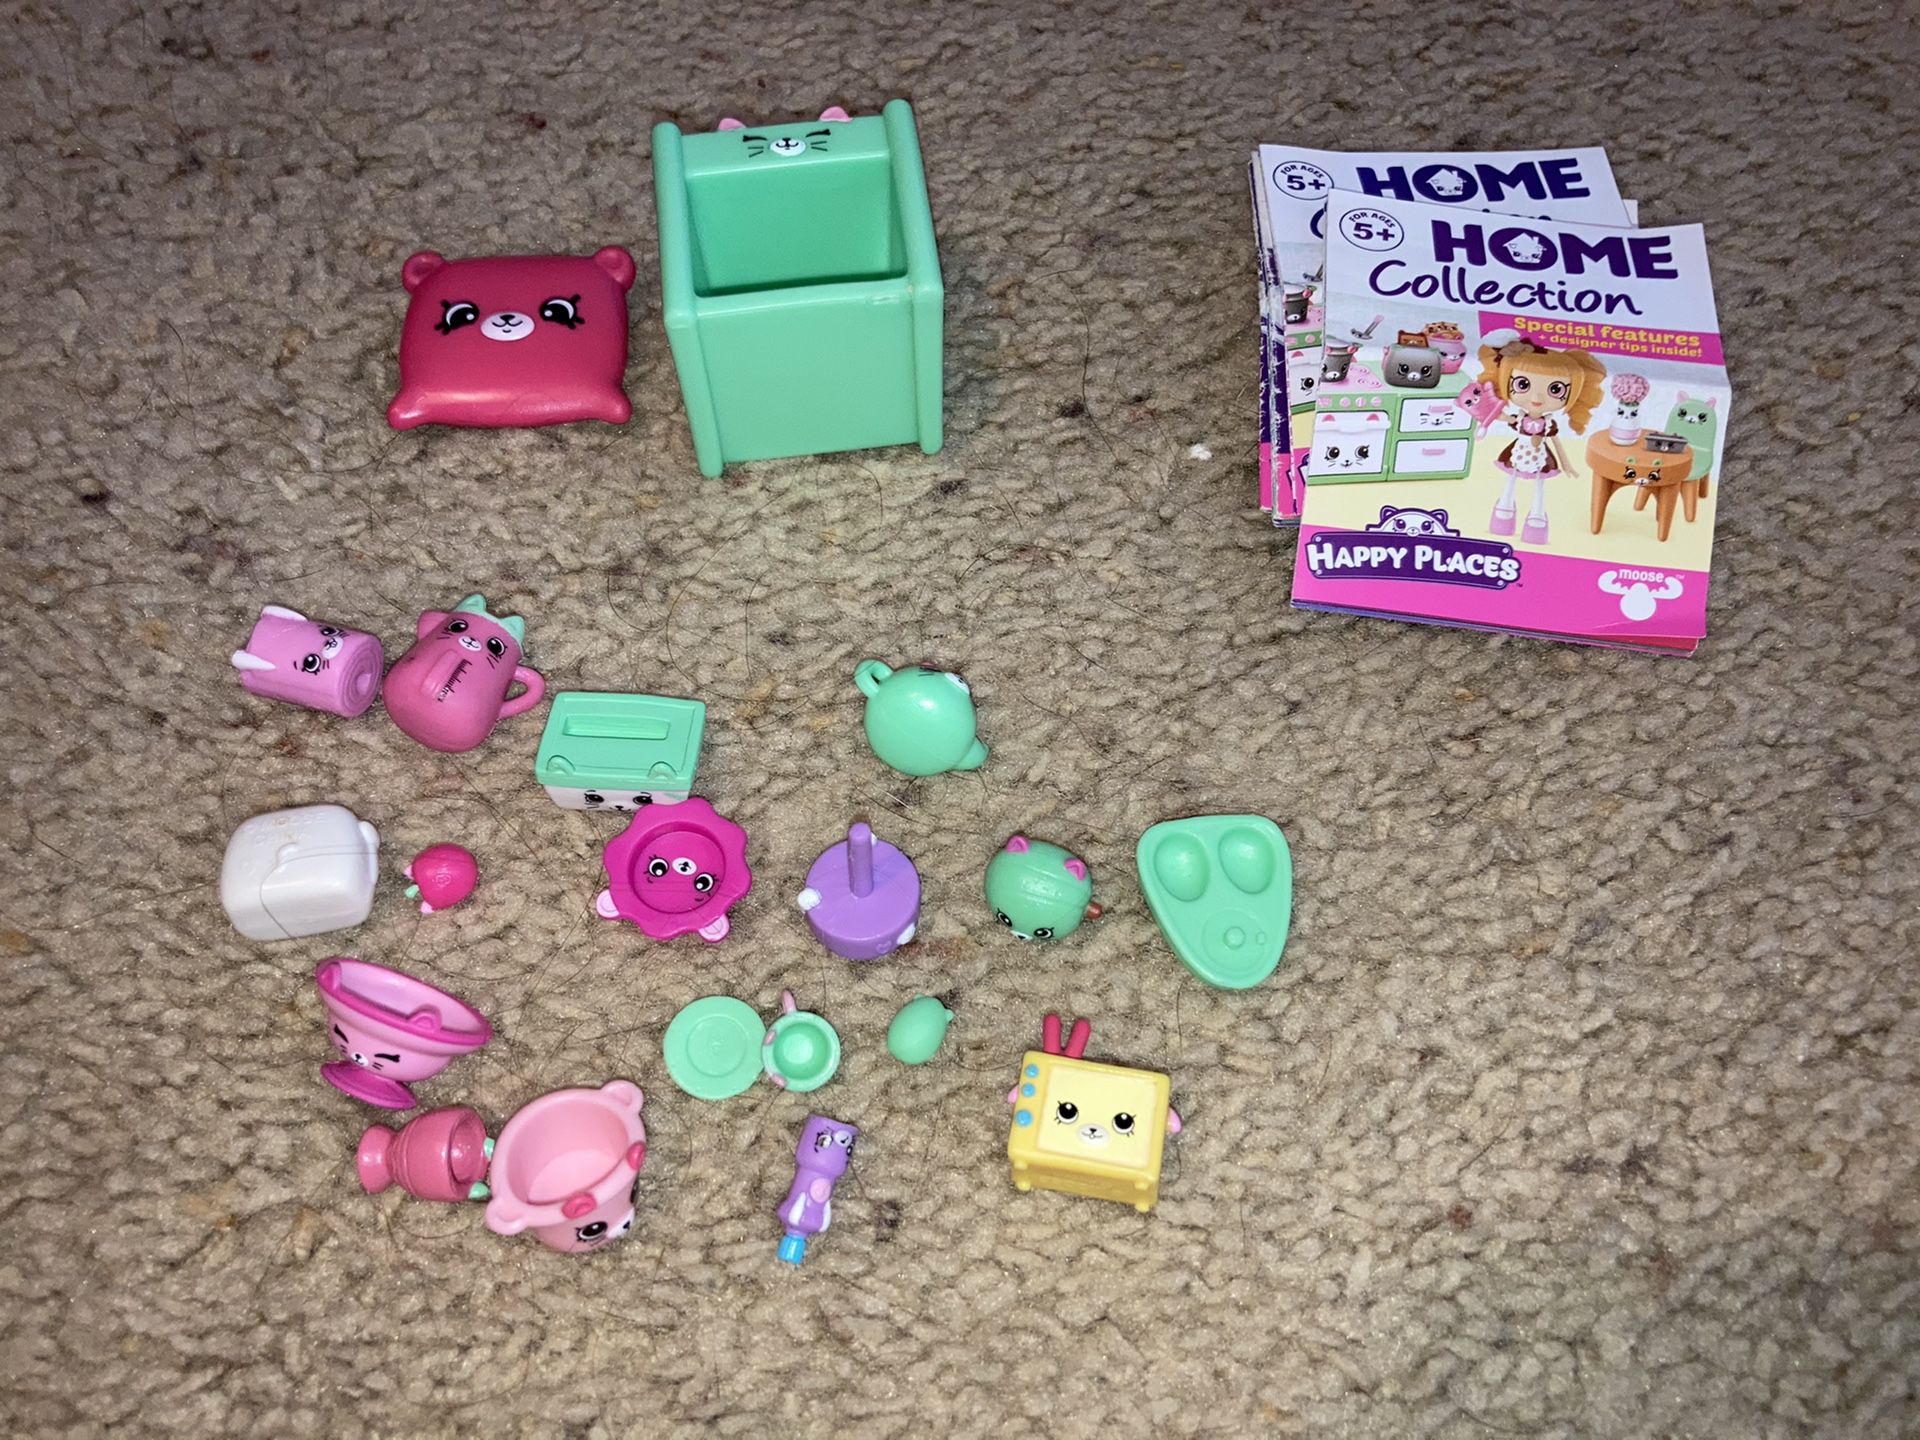 Shopkins Home Collection